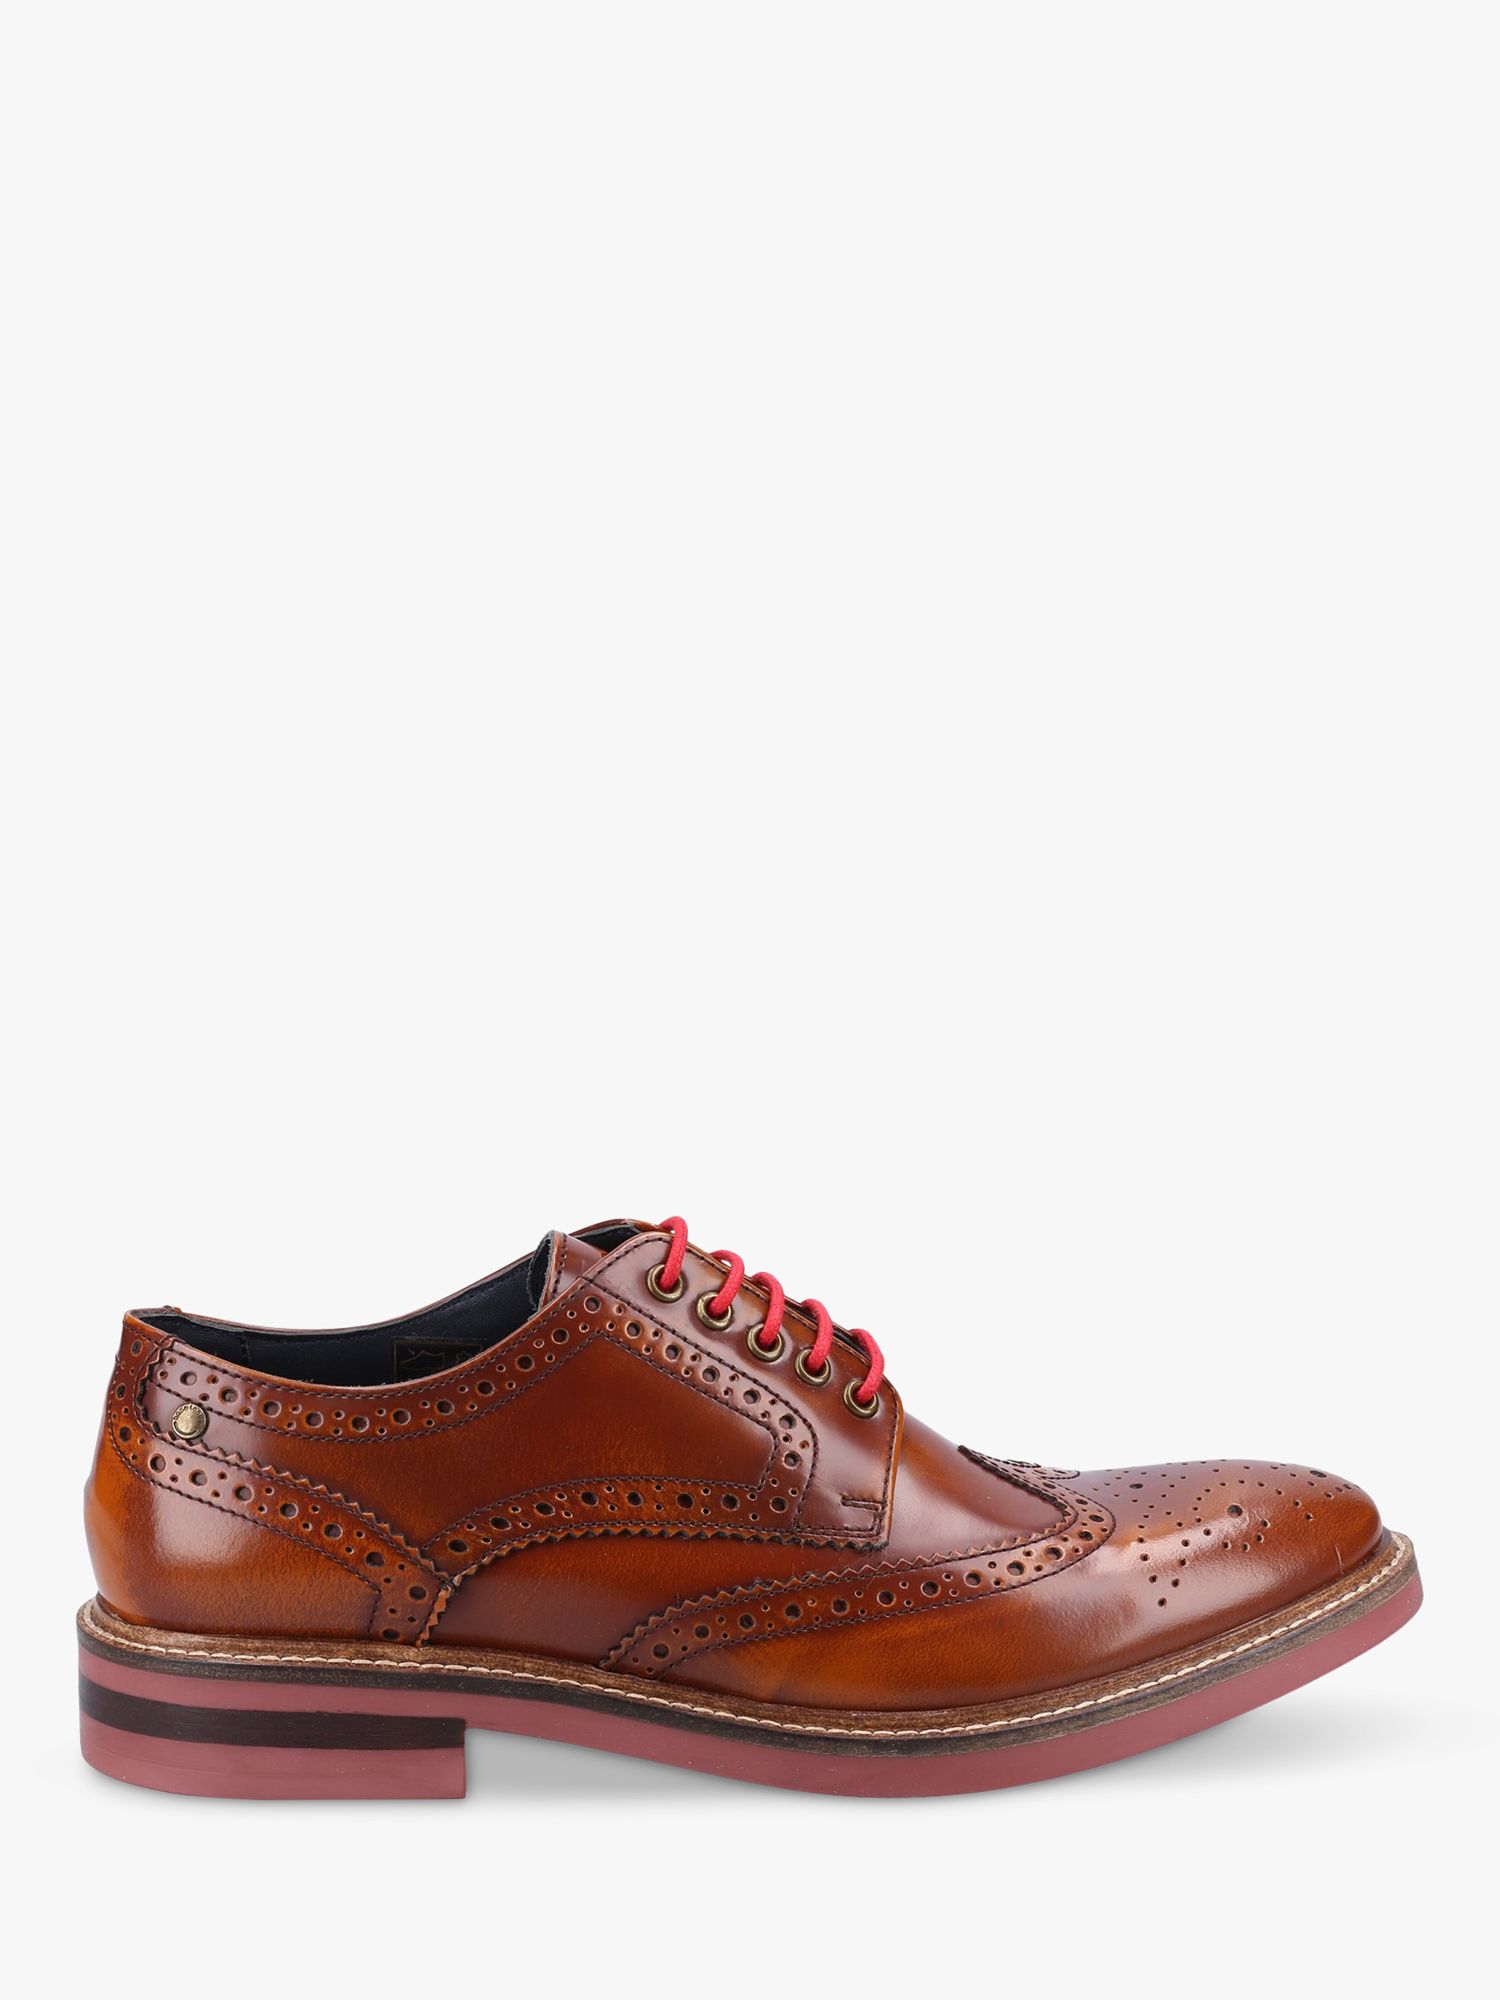 Base London Woburn Leather Derby Shoes, Tan, 6